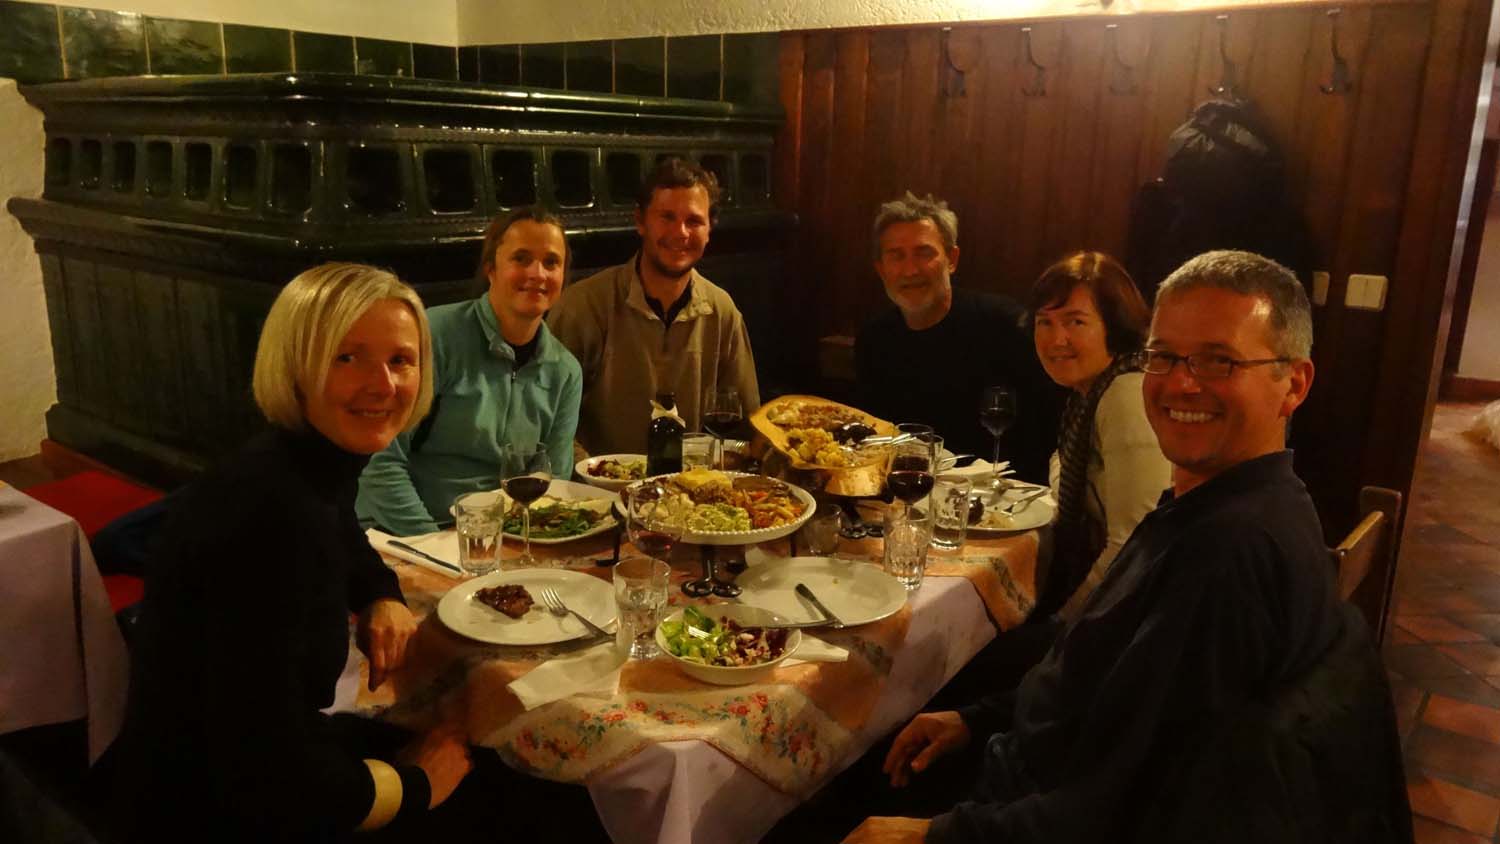 A memorable traditional dinner with Lojze, Petra, Milos and Majda - we had not seen the boys since Kazakhstan!